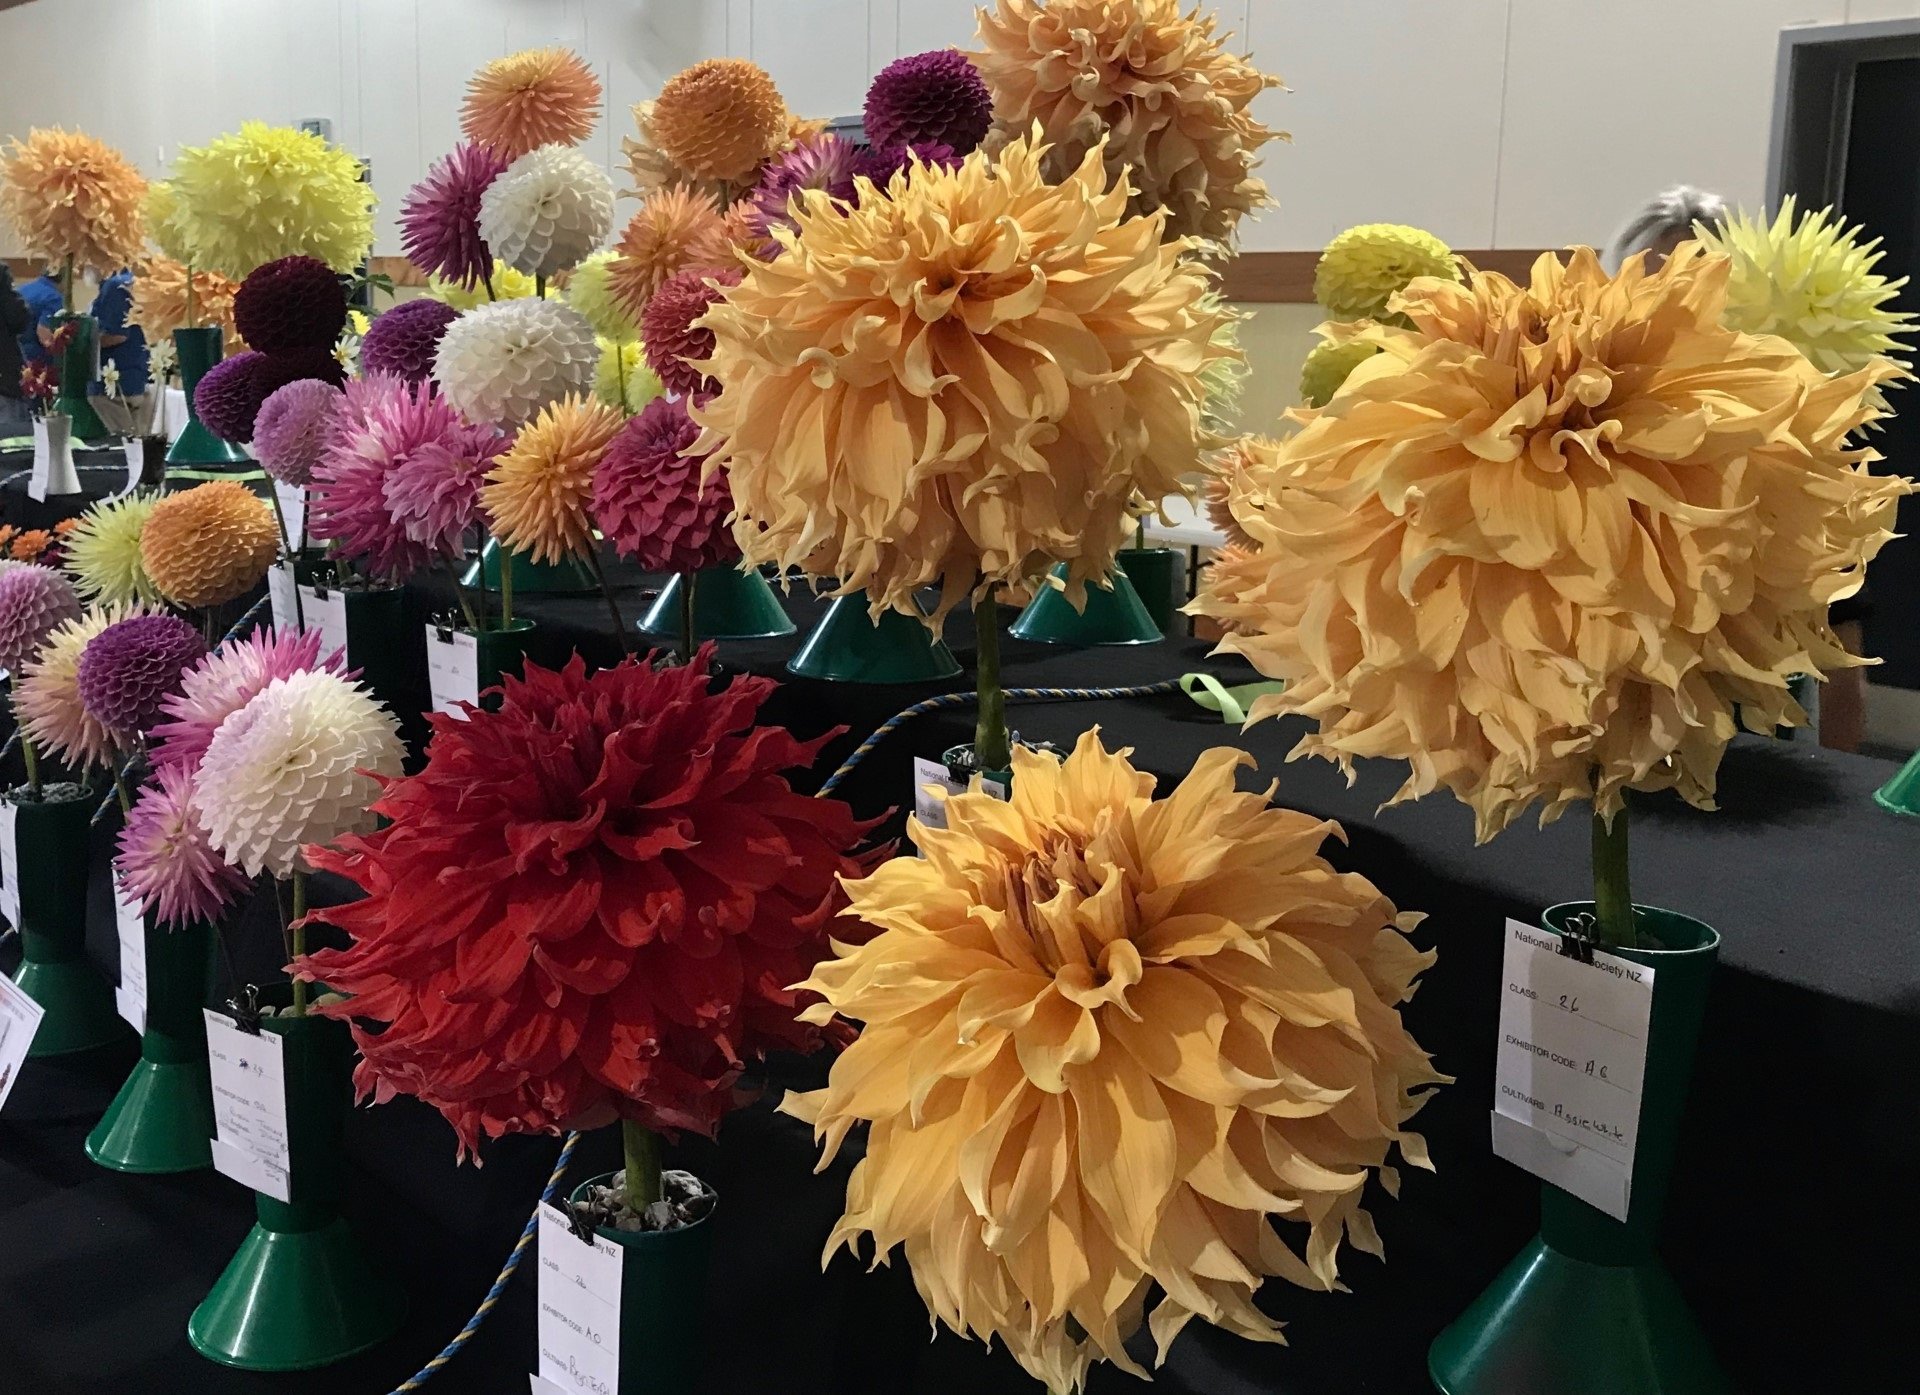 The colour range at the show impressed the judges.